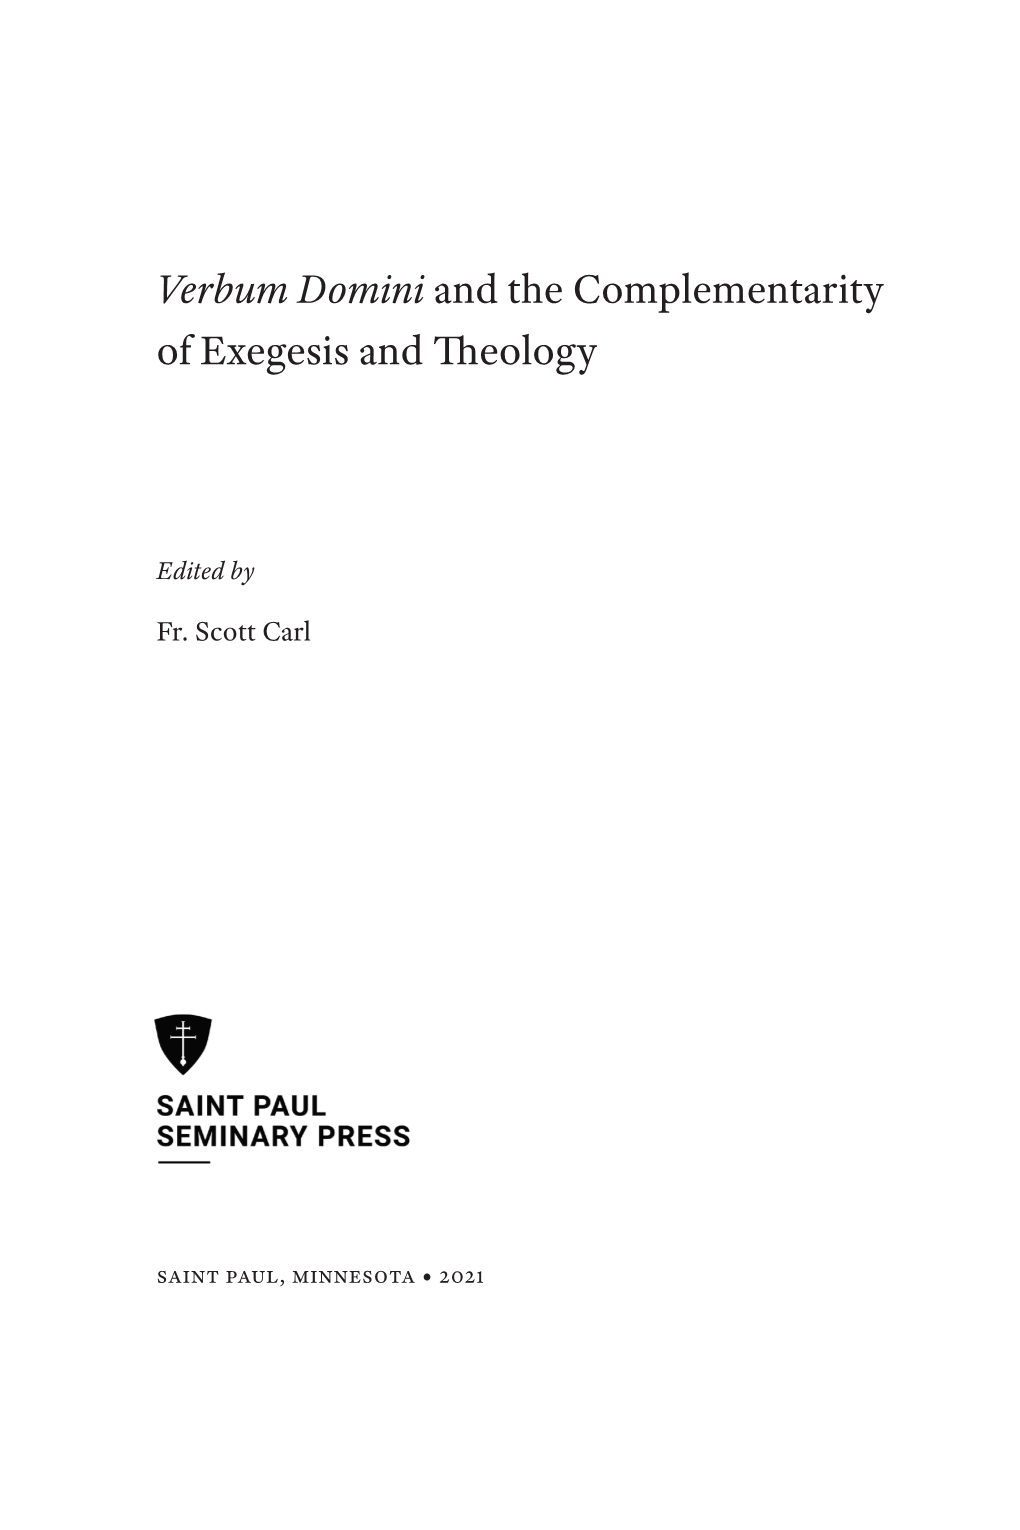 Verbum Domini and the Complementarity of Exegesis and Theology